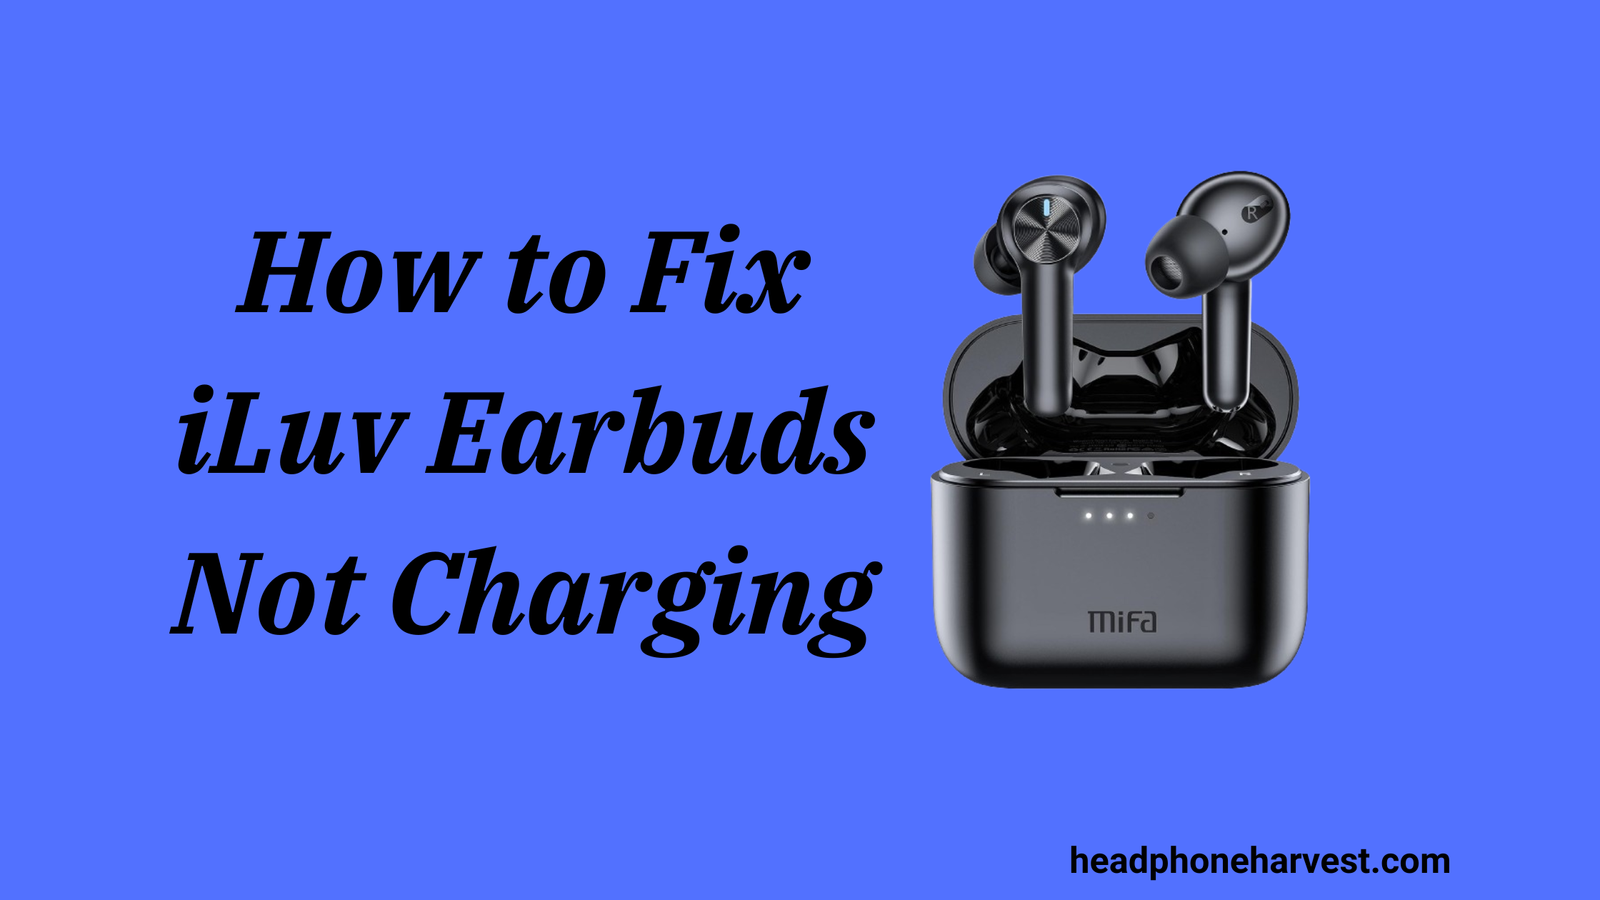 How to Fix iLuv Earbuds Not Charging